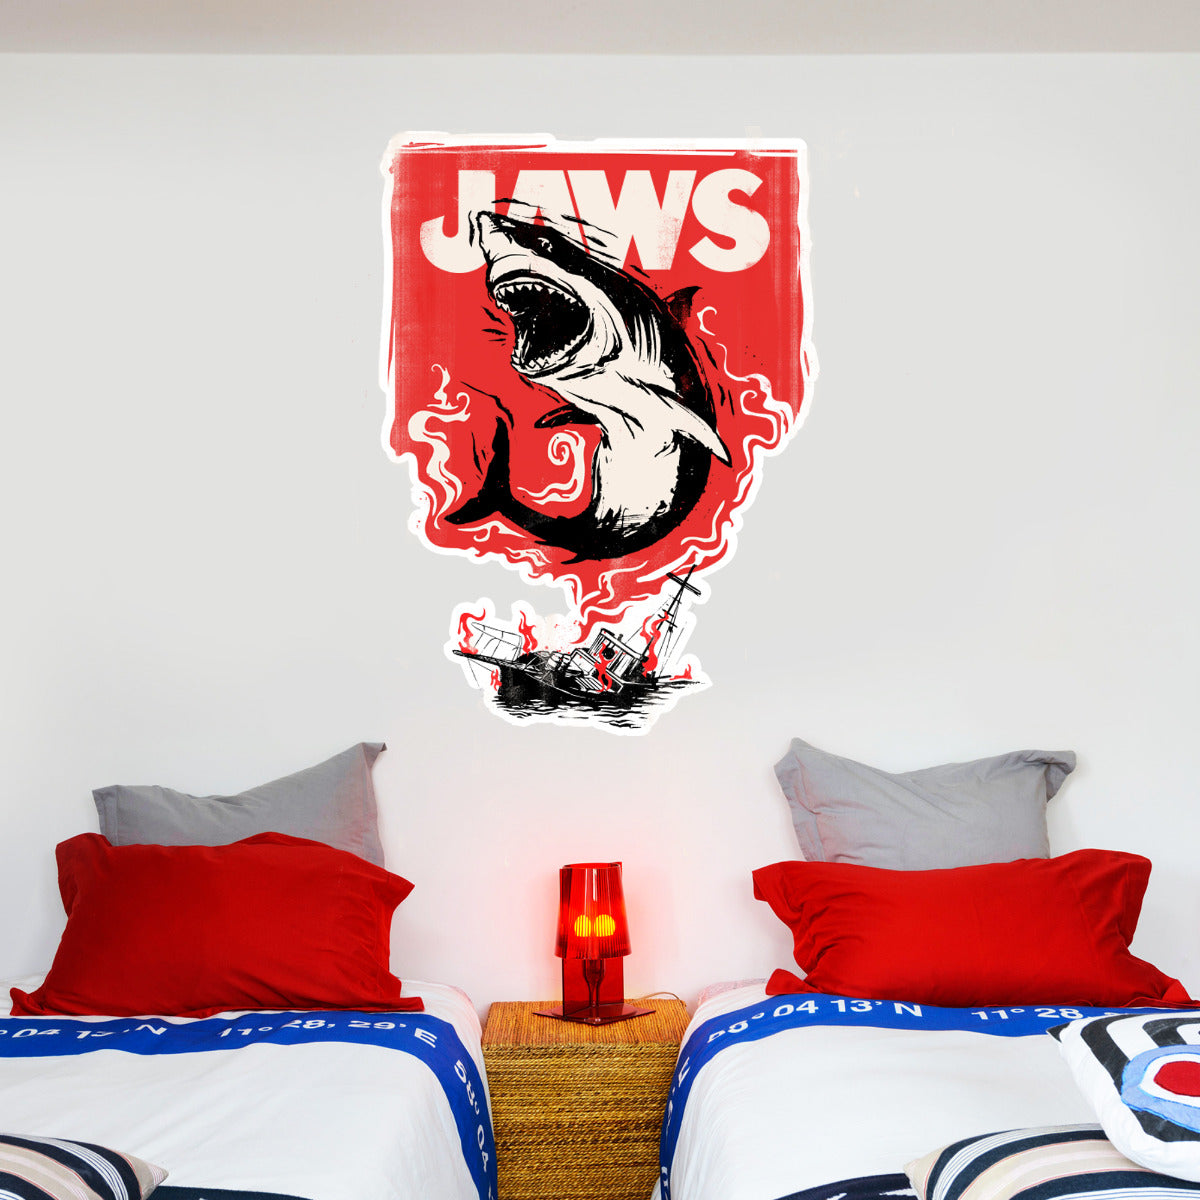 Jaws Wall Sticker Red Shark Graphic